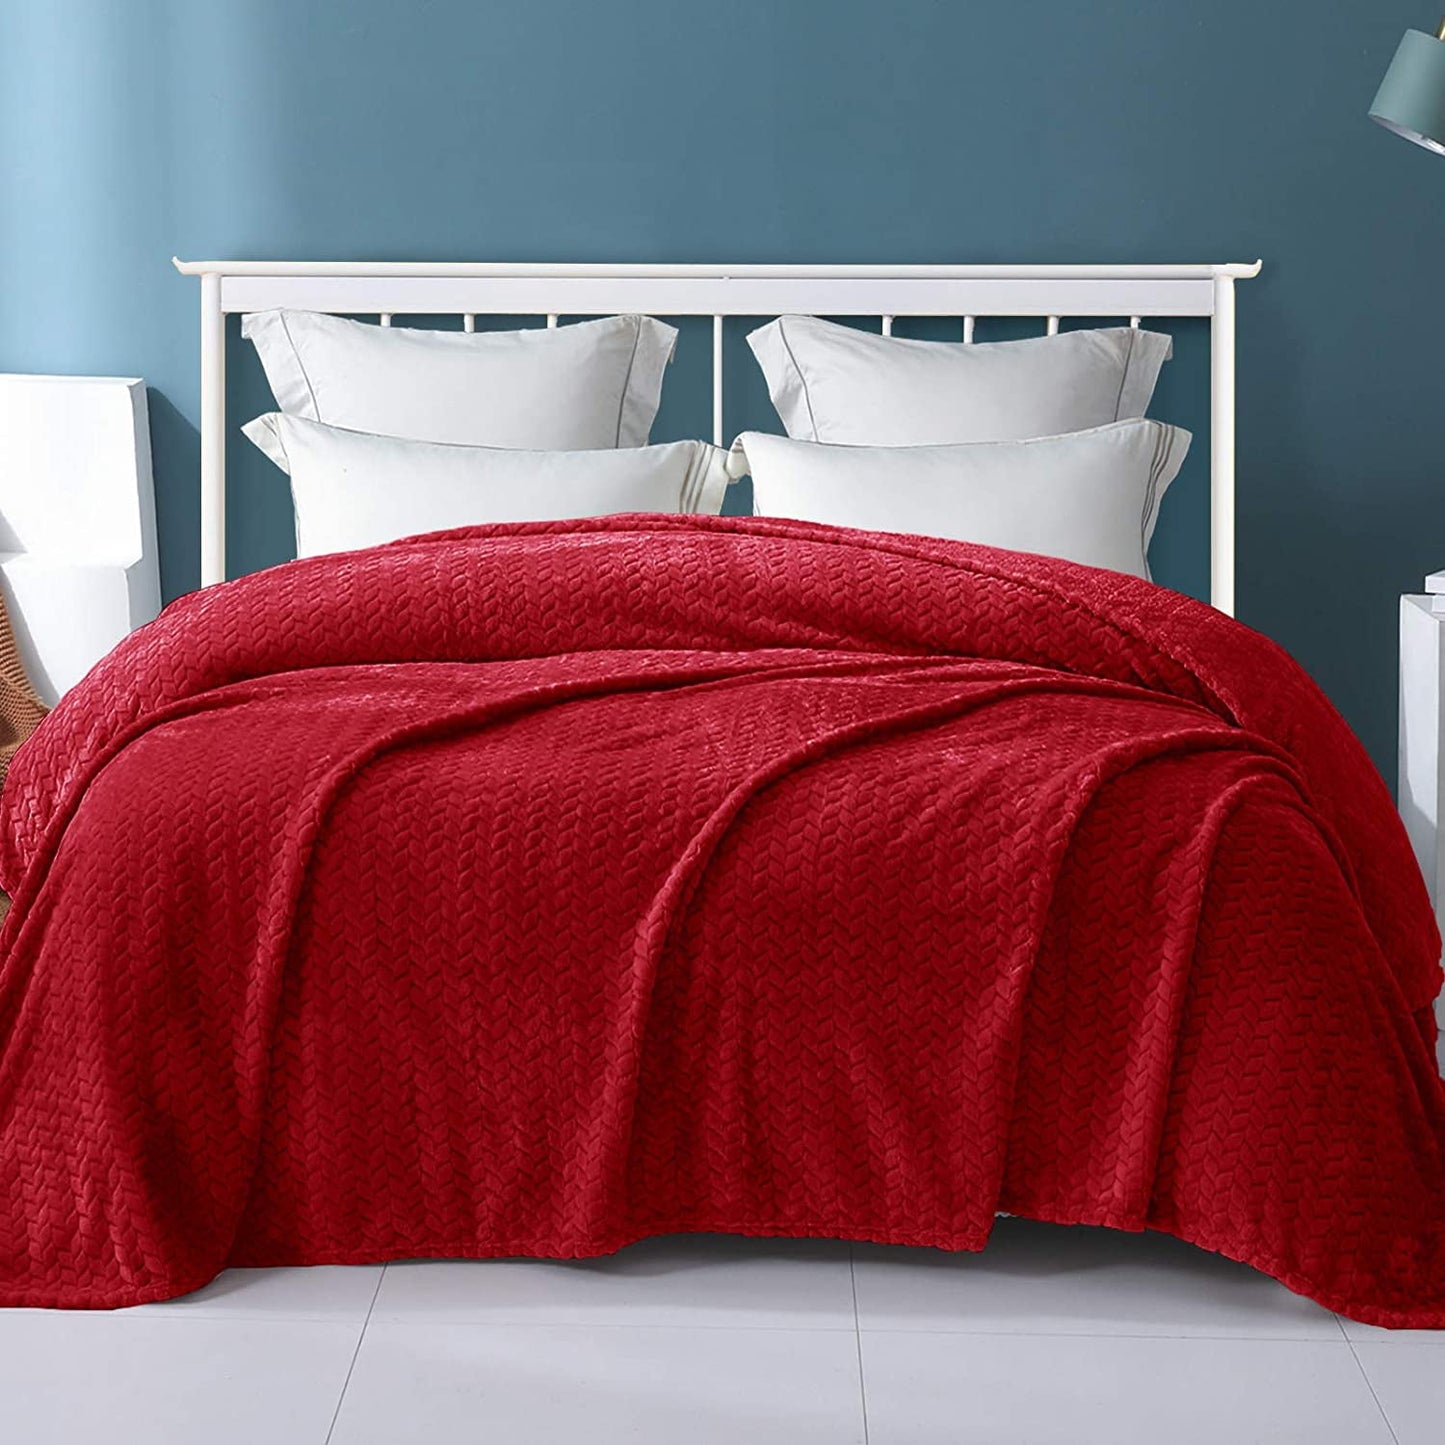 Exclusivo Mezcla Twin Size Jacquard Weave Leaves Pattern Flannel Fleece Velvet Plush Bed Blanket for Couch Bed Sofa (90" x 66", Red) - Soft, Lightweight, Warm and Cozy